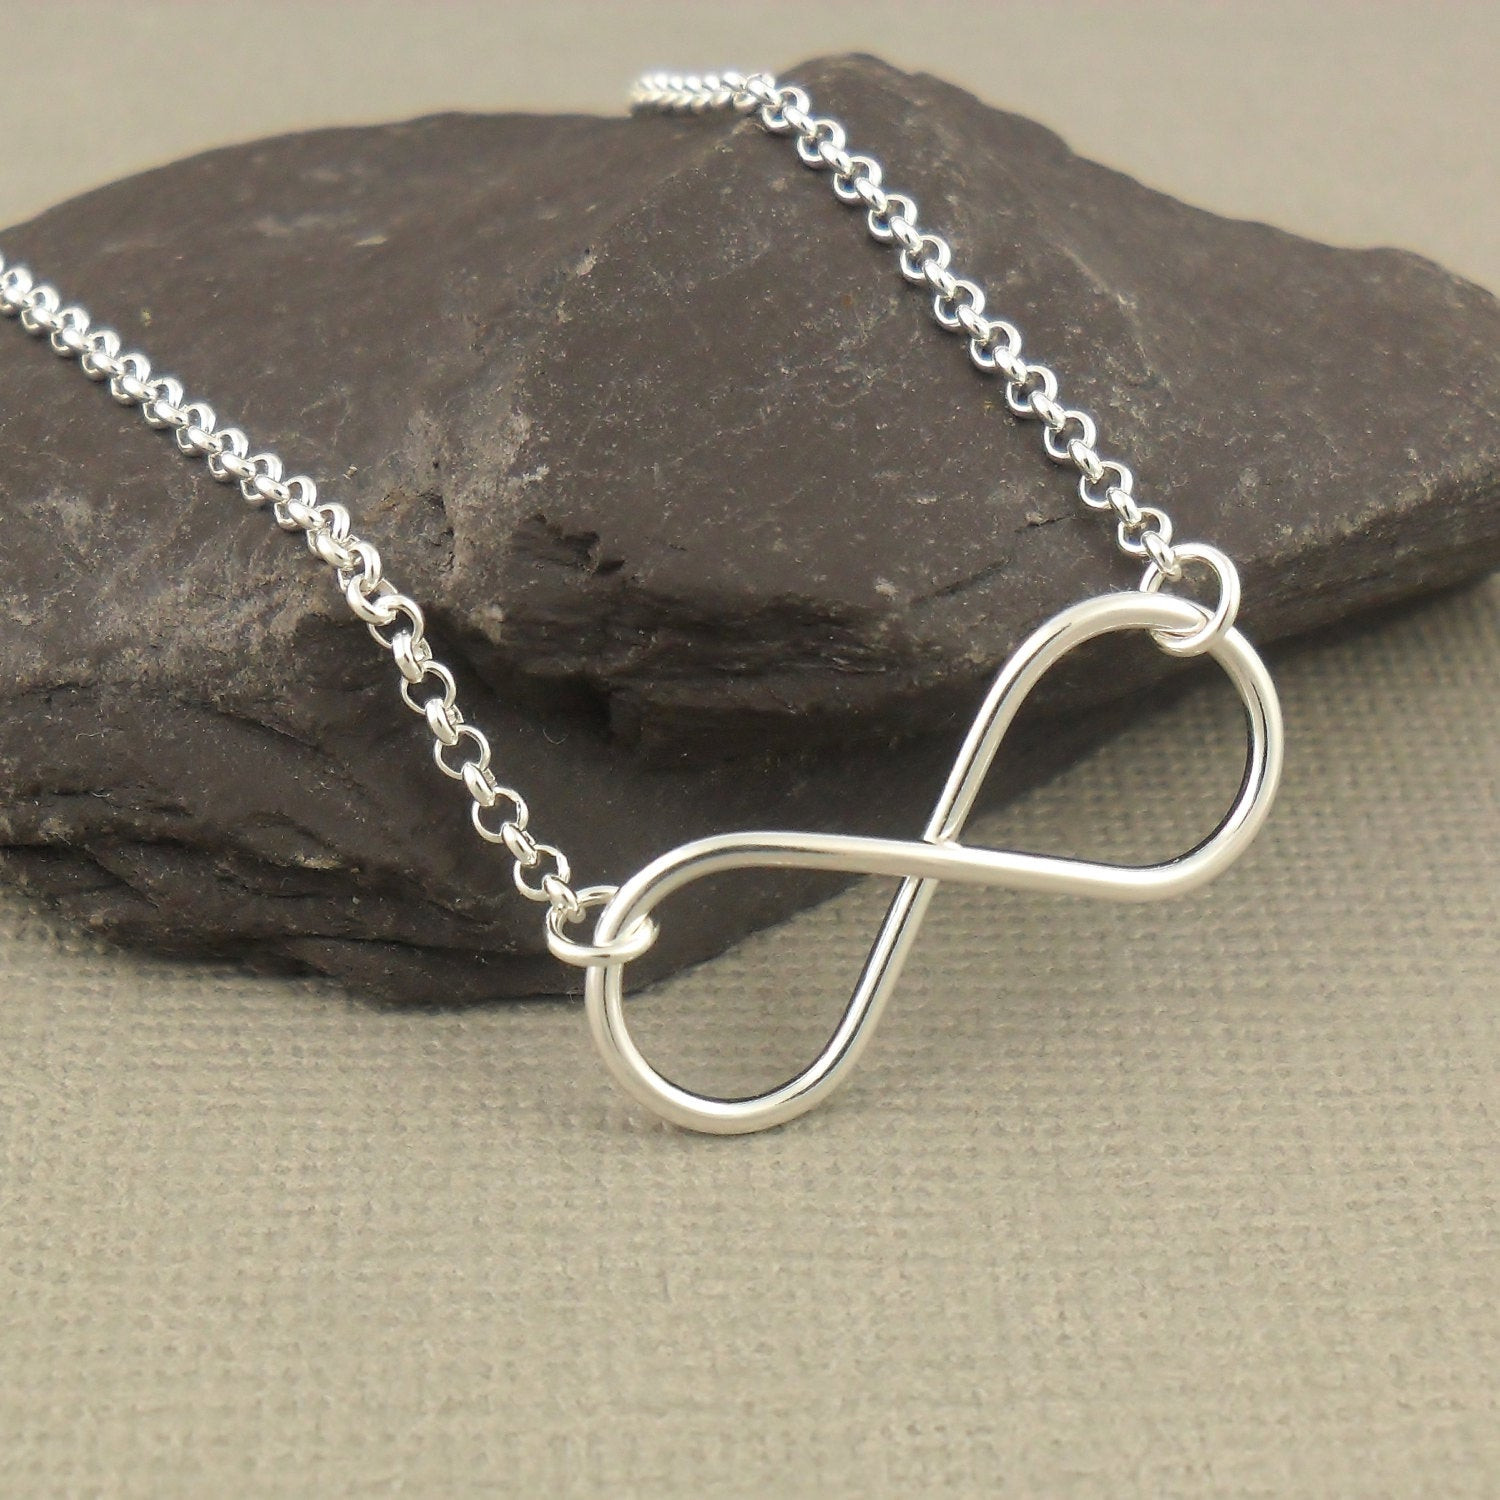 Sterling Silver Infinity Necklace
 Infinity Necklace Sterling Silver Necklace 925